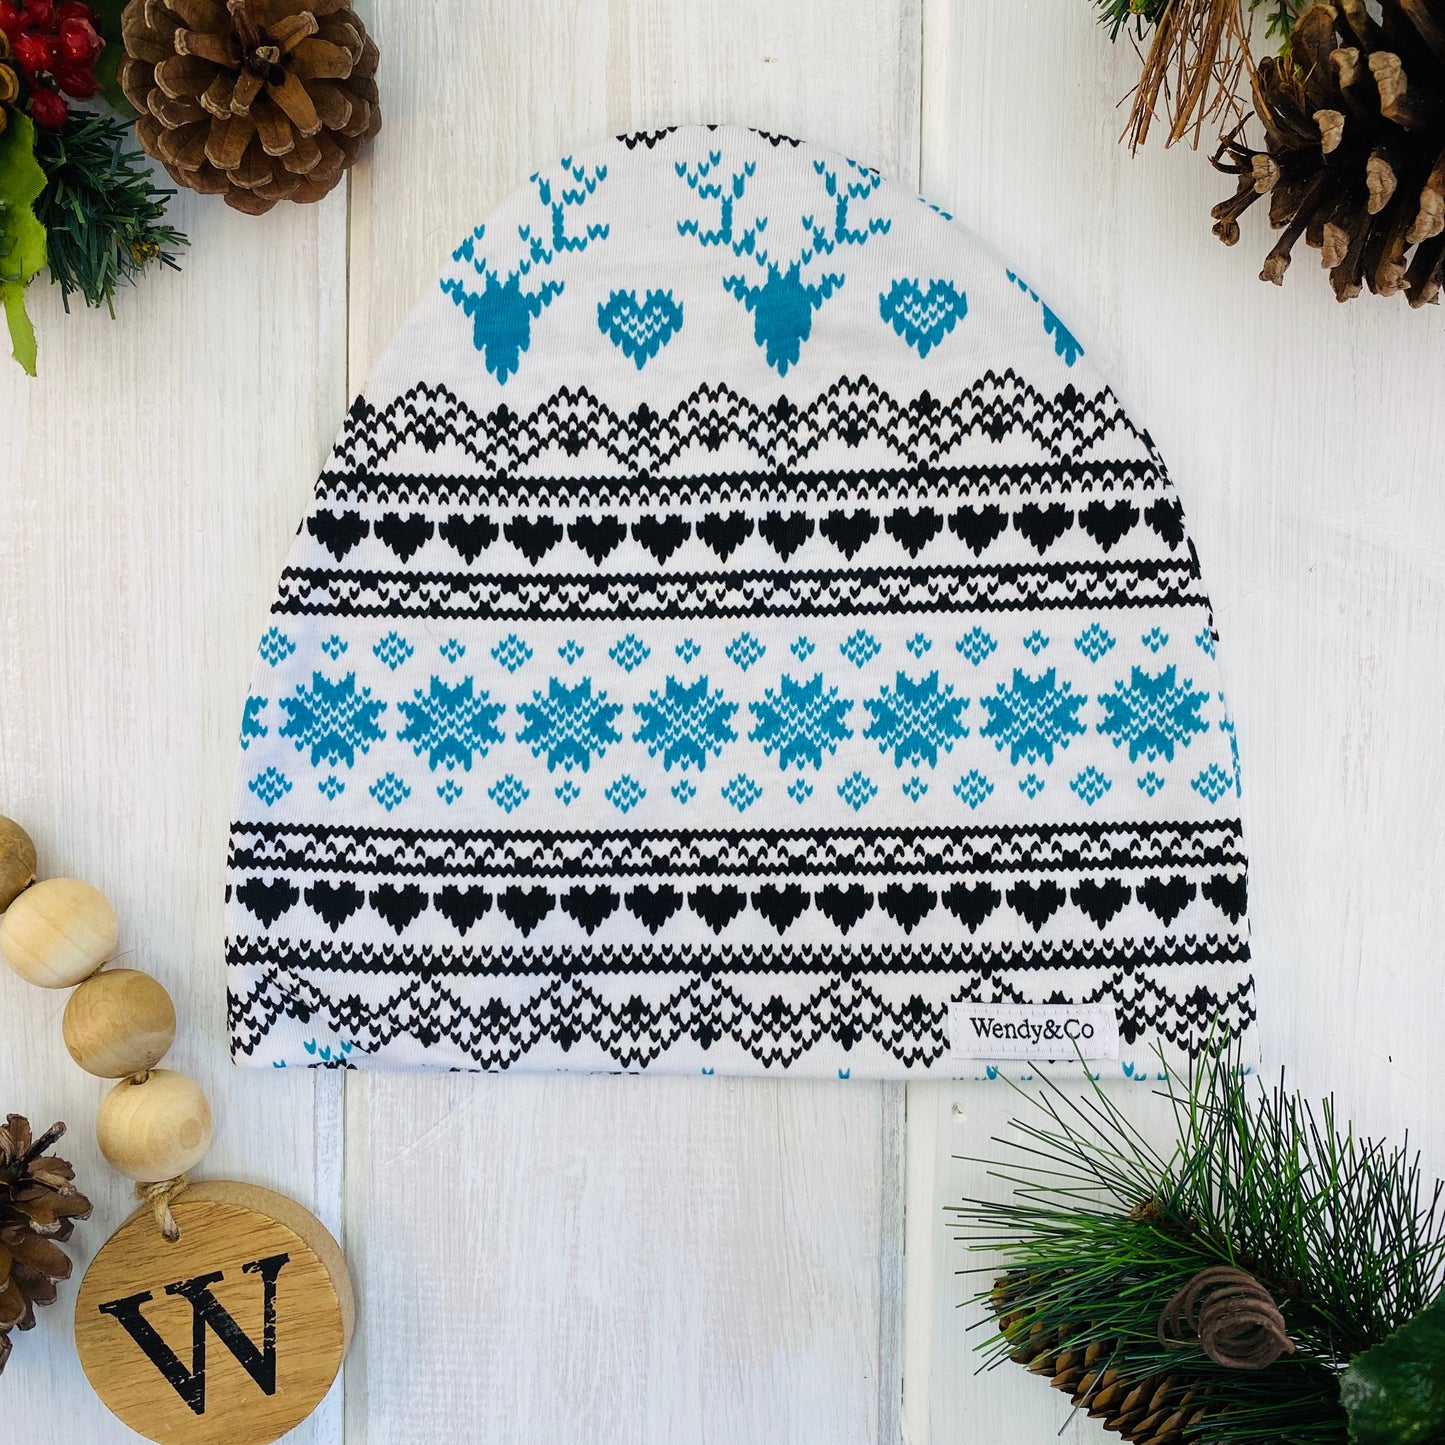 Blue and black Nordic print with deer, hearts and snowflakes...gender neutral,.